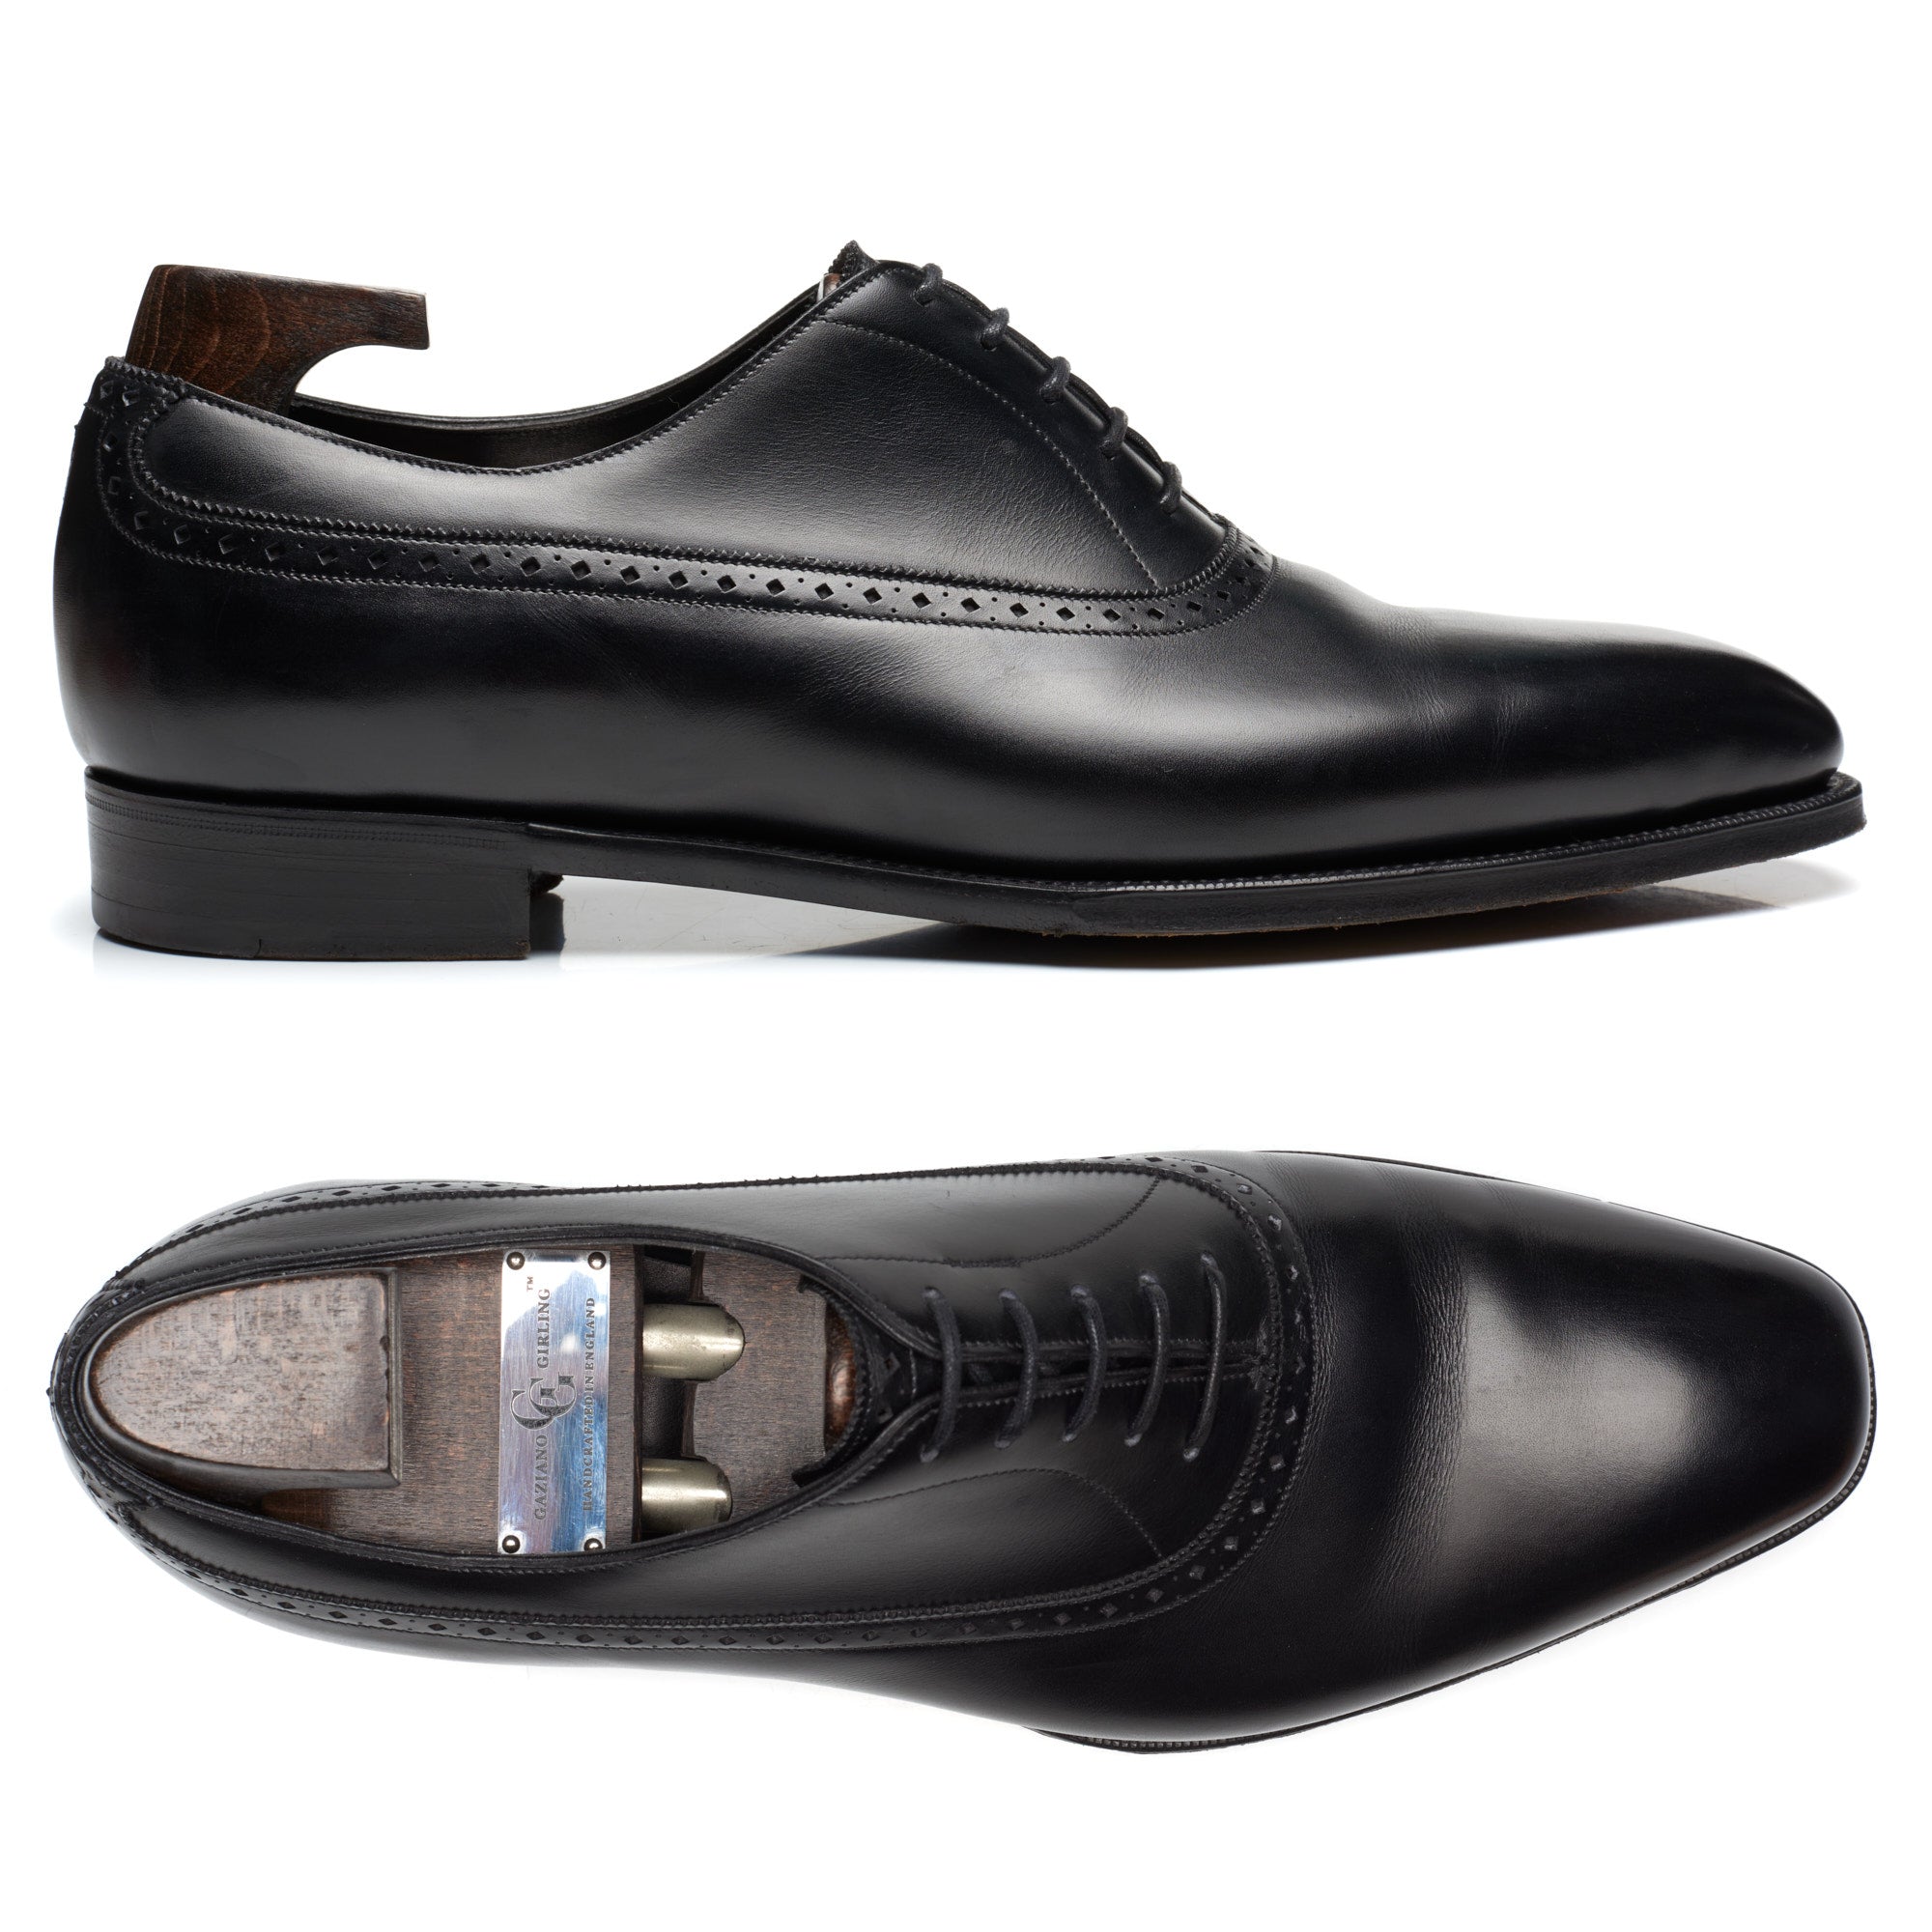 GAZIANO & GIRLING "Kent" Black Calf Leather Oxford Dress Shoes 8E US 8.5 Last MH71 GAZIANO & GIRLING